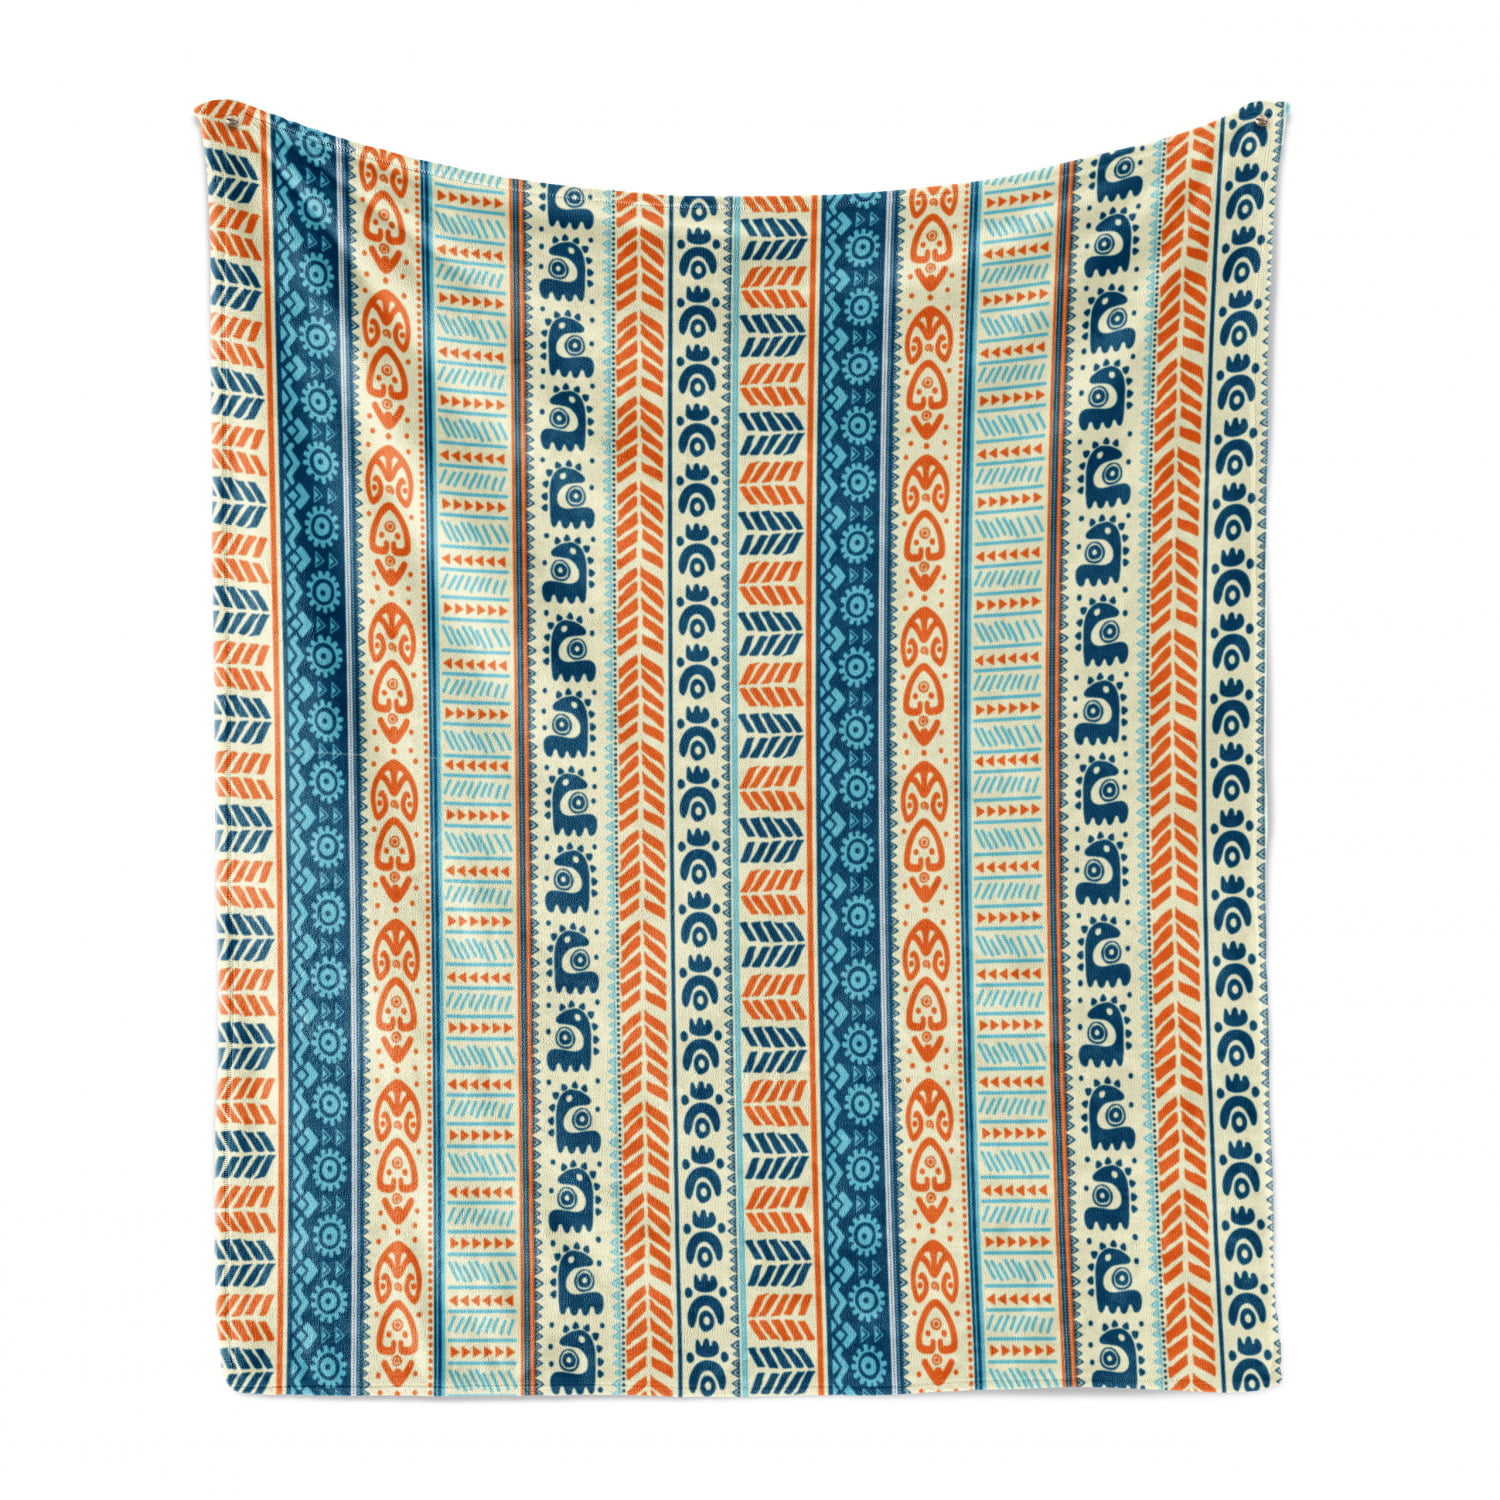 Striped Retro Pattern Rich Mexican Color Folkloric Print 50 x 60 Cozy Plush for Indoor and Outdoor Use Teal Plum and Orange Ambesonne Tribal Soft Flannel Fleece Throw Blanket